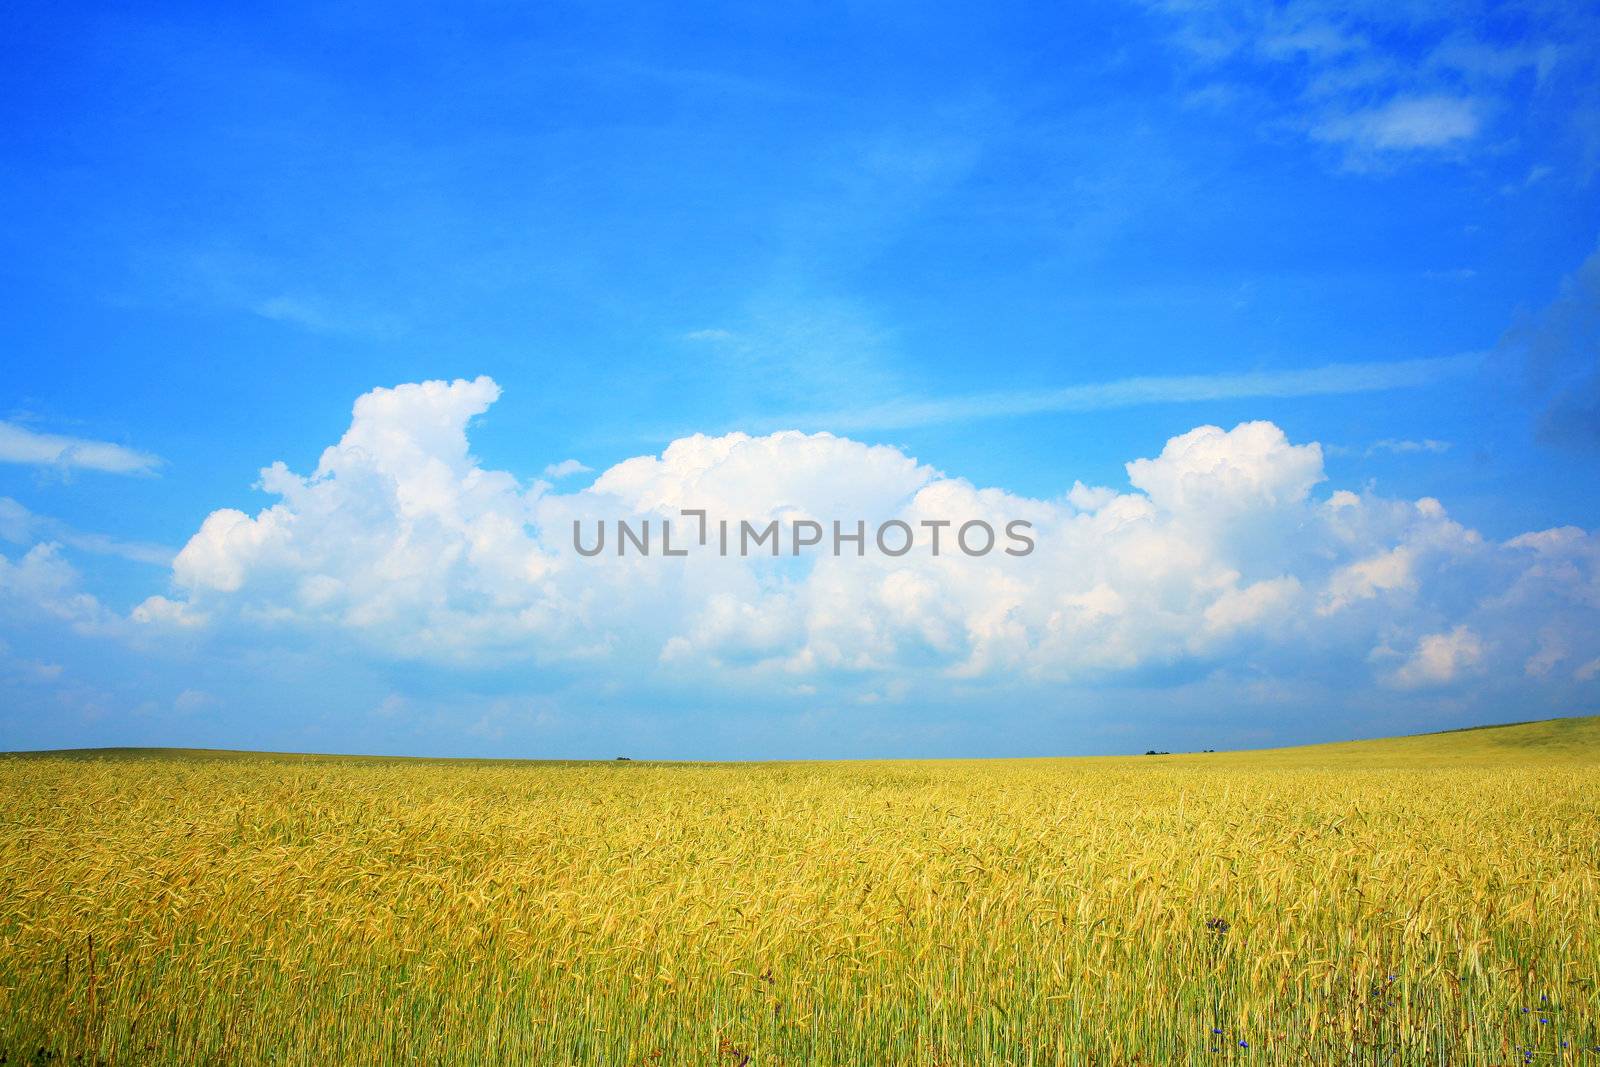 An image of yellow field of wheat and blue sky